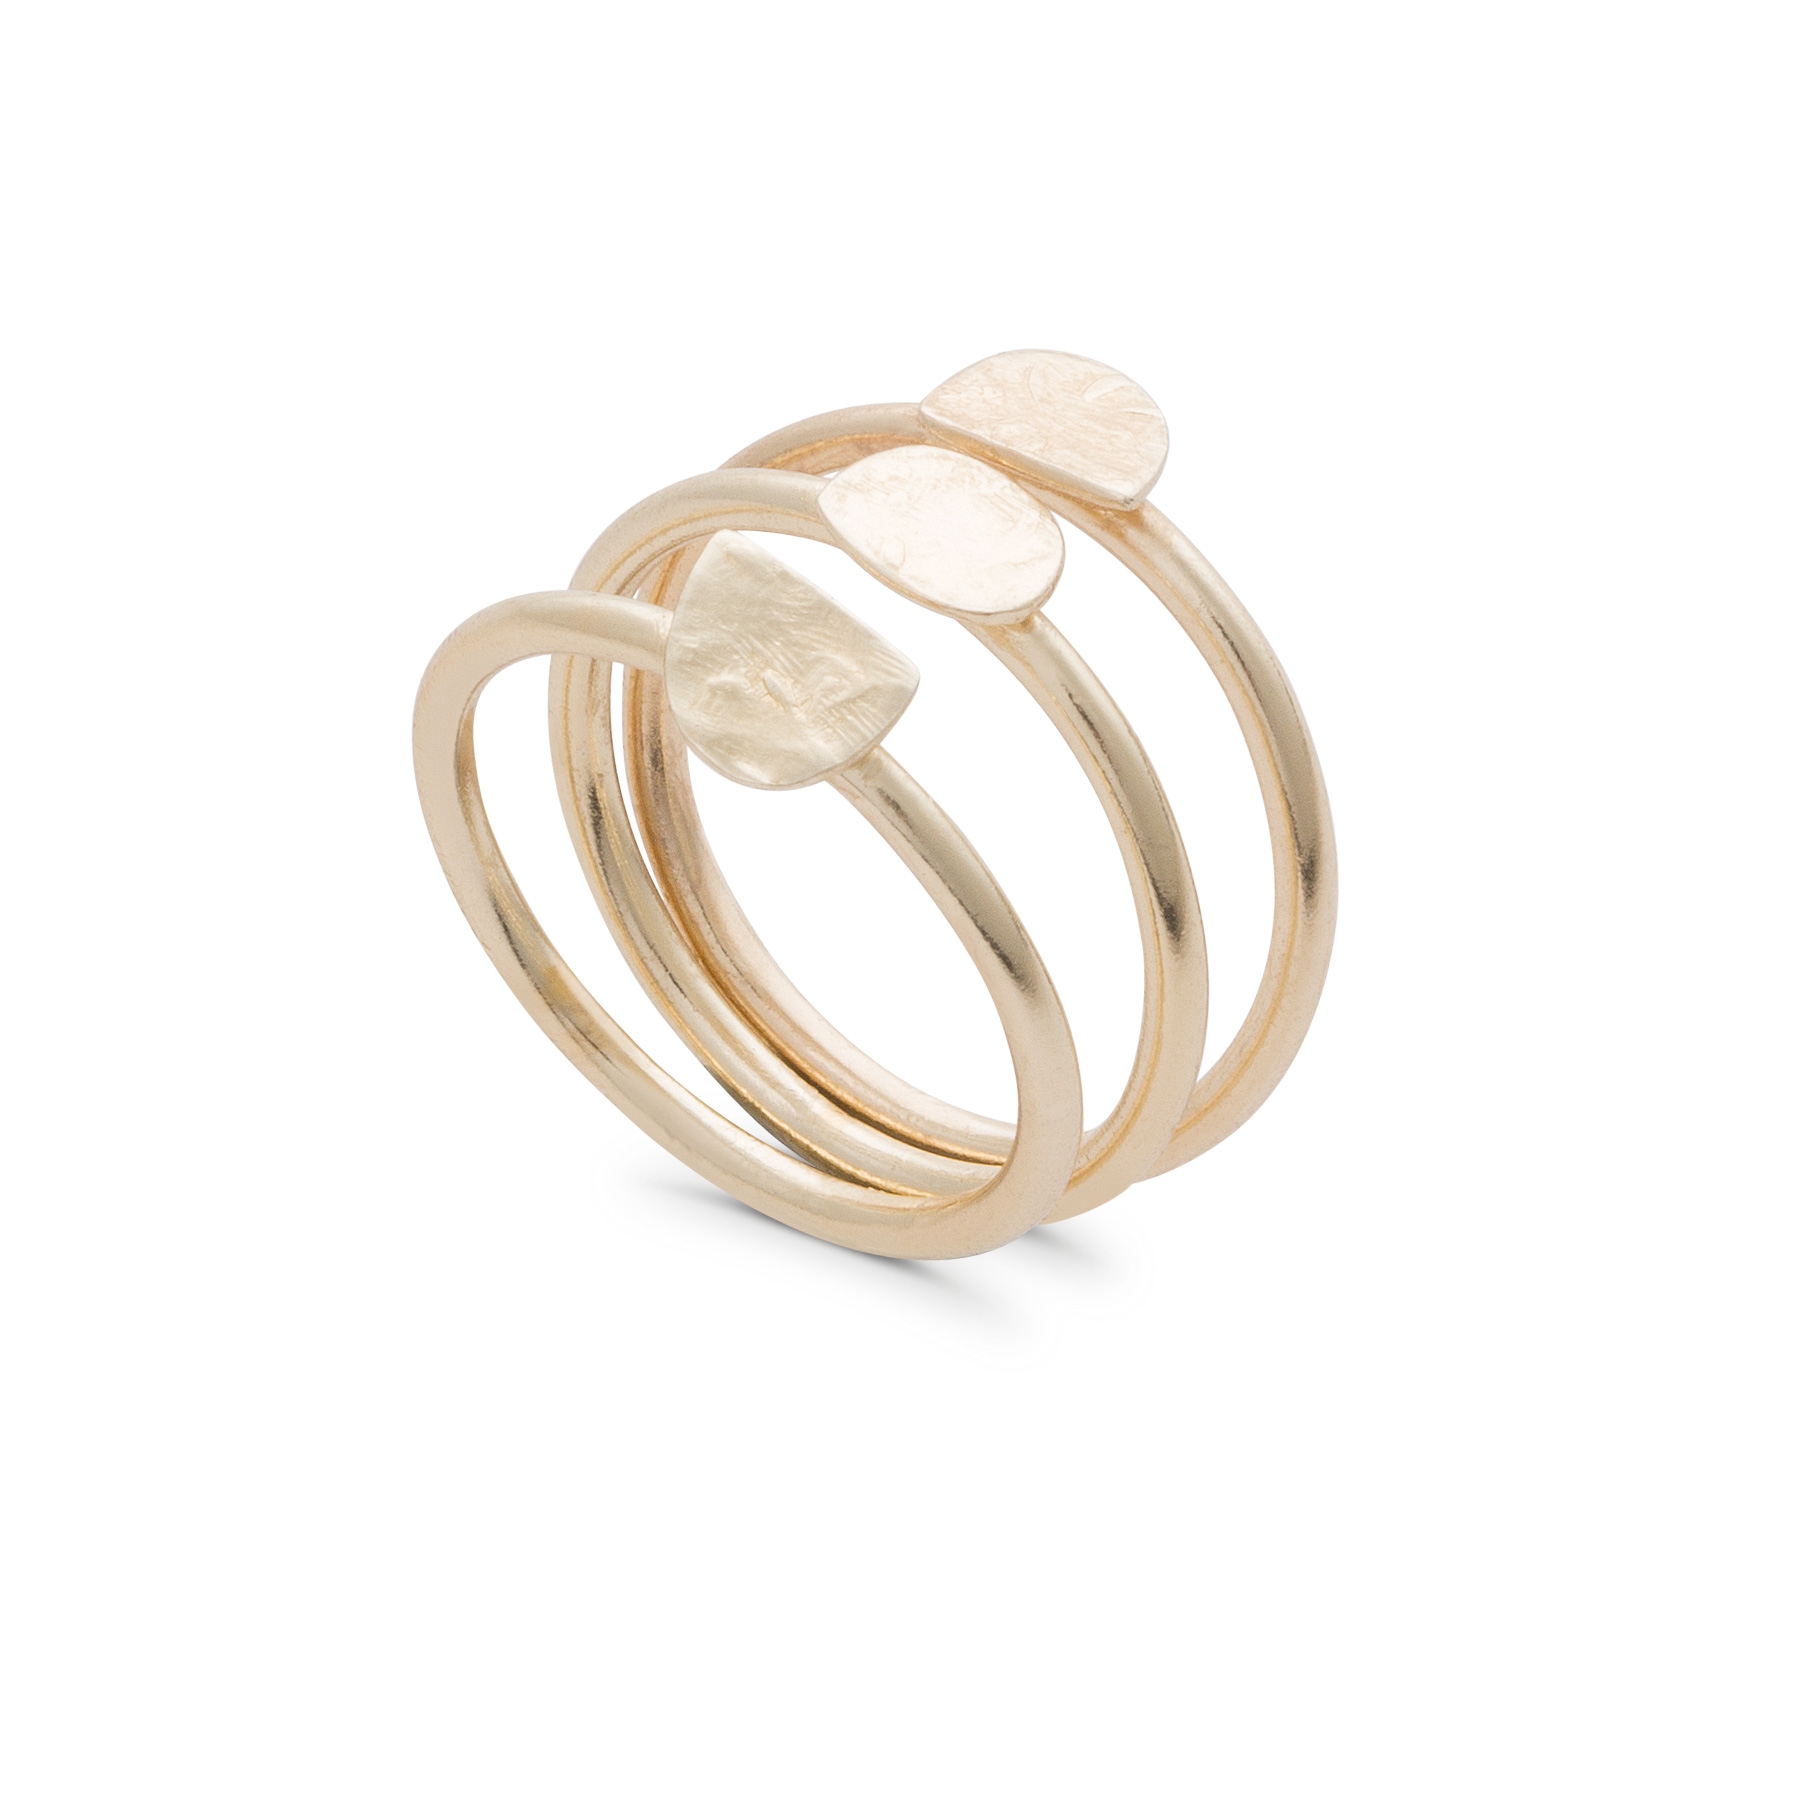 Gold Set of Three Dolores Shapes Rings | Oliver Bonas